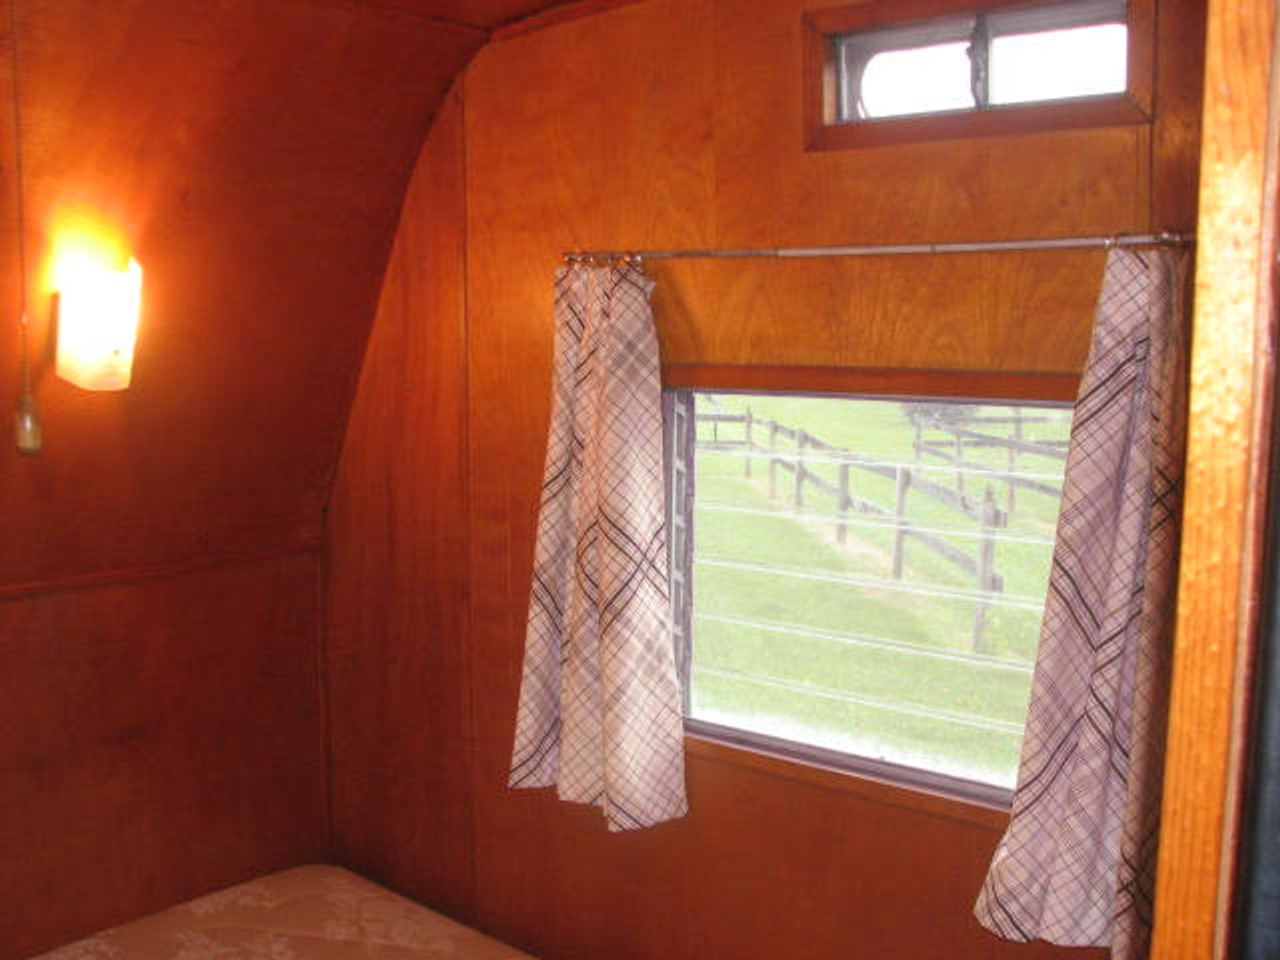 1956 Monocoach 41' Two Bedroom #2037